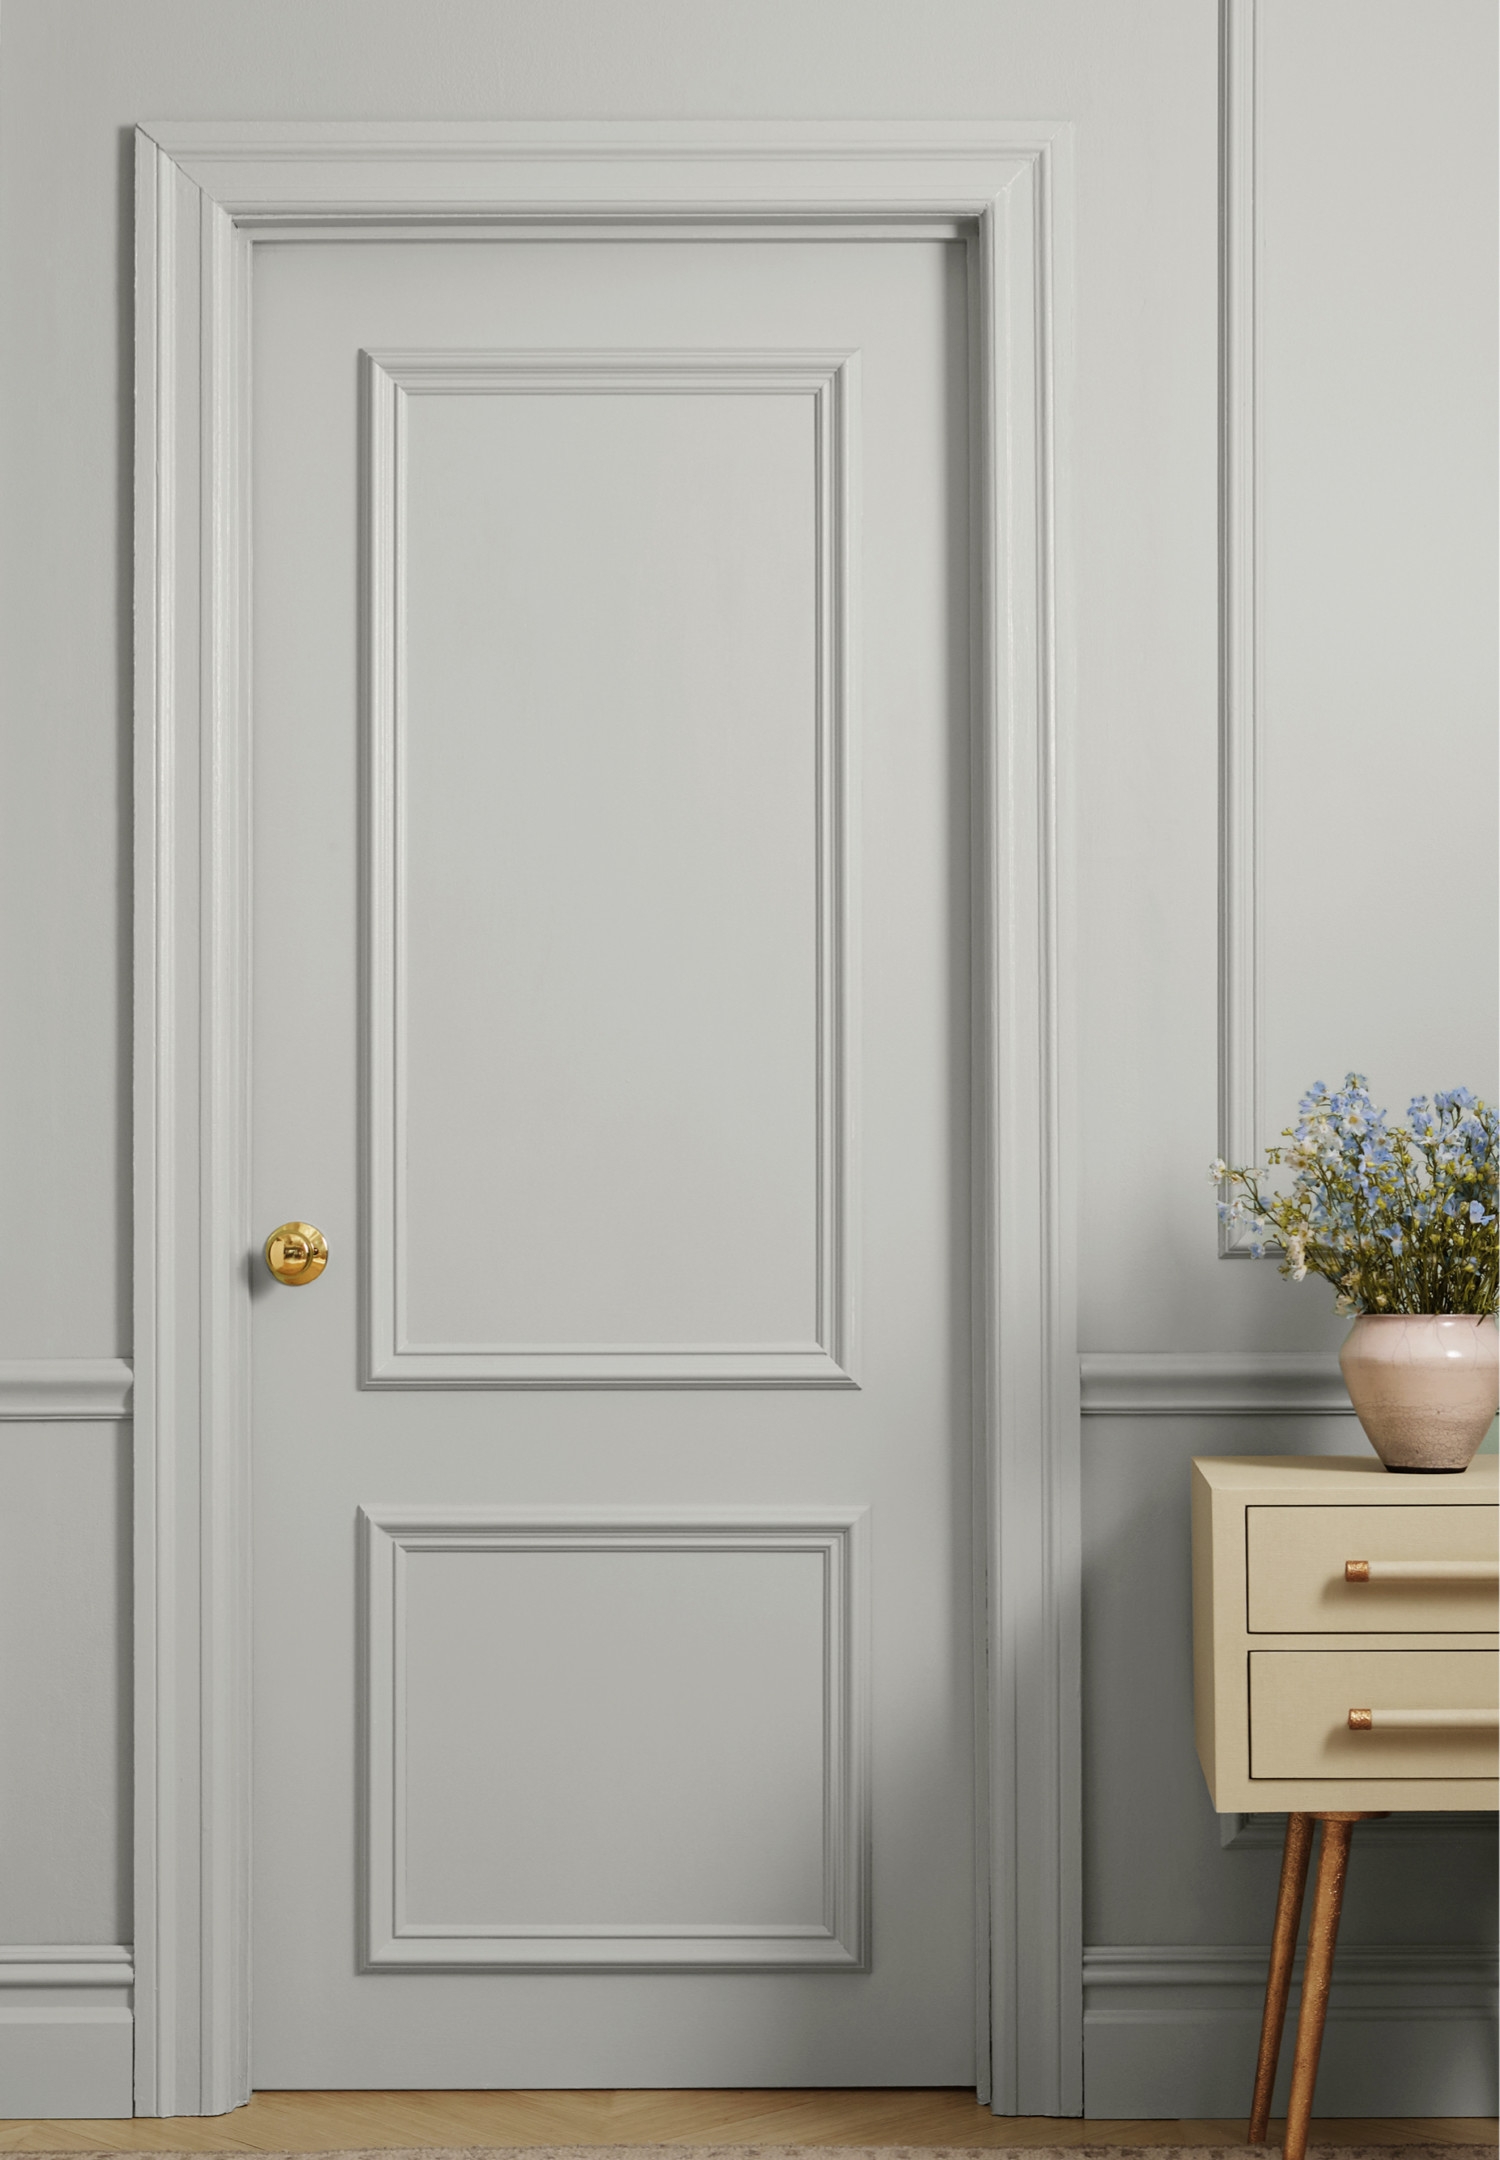 Clare Paint - Seize The Gray - Trim Swatch - Image 1